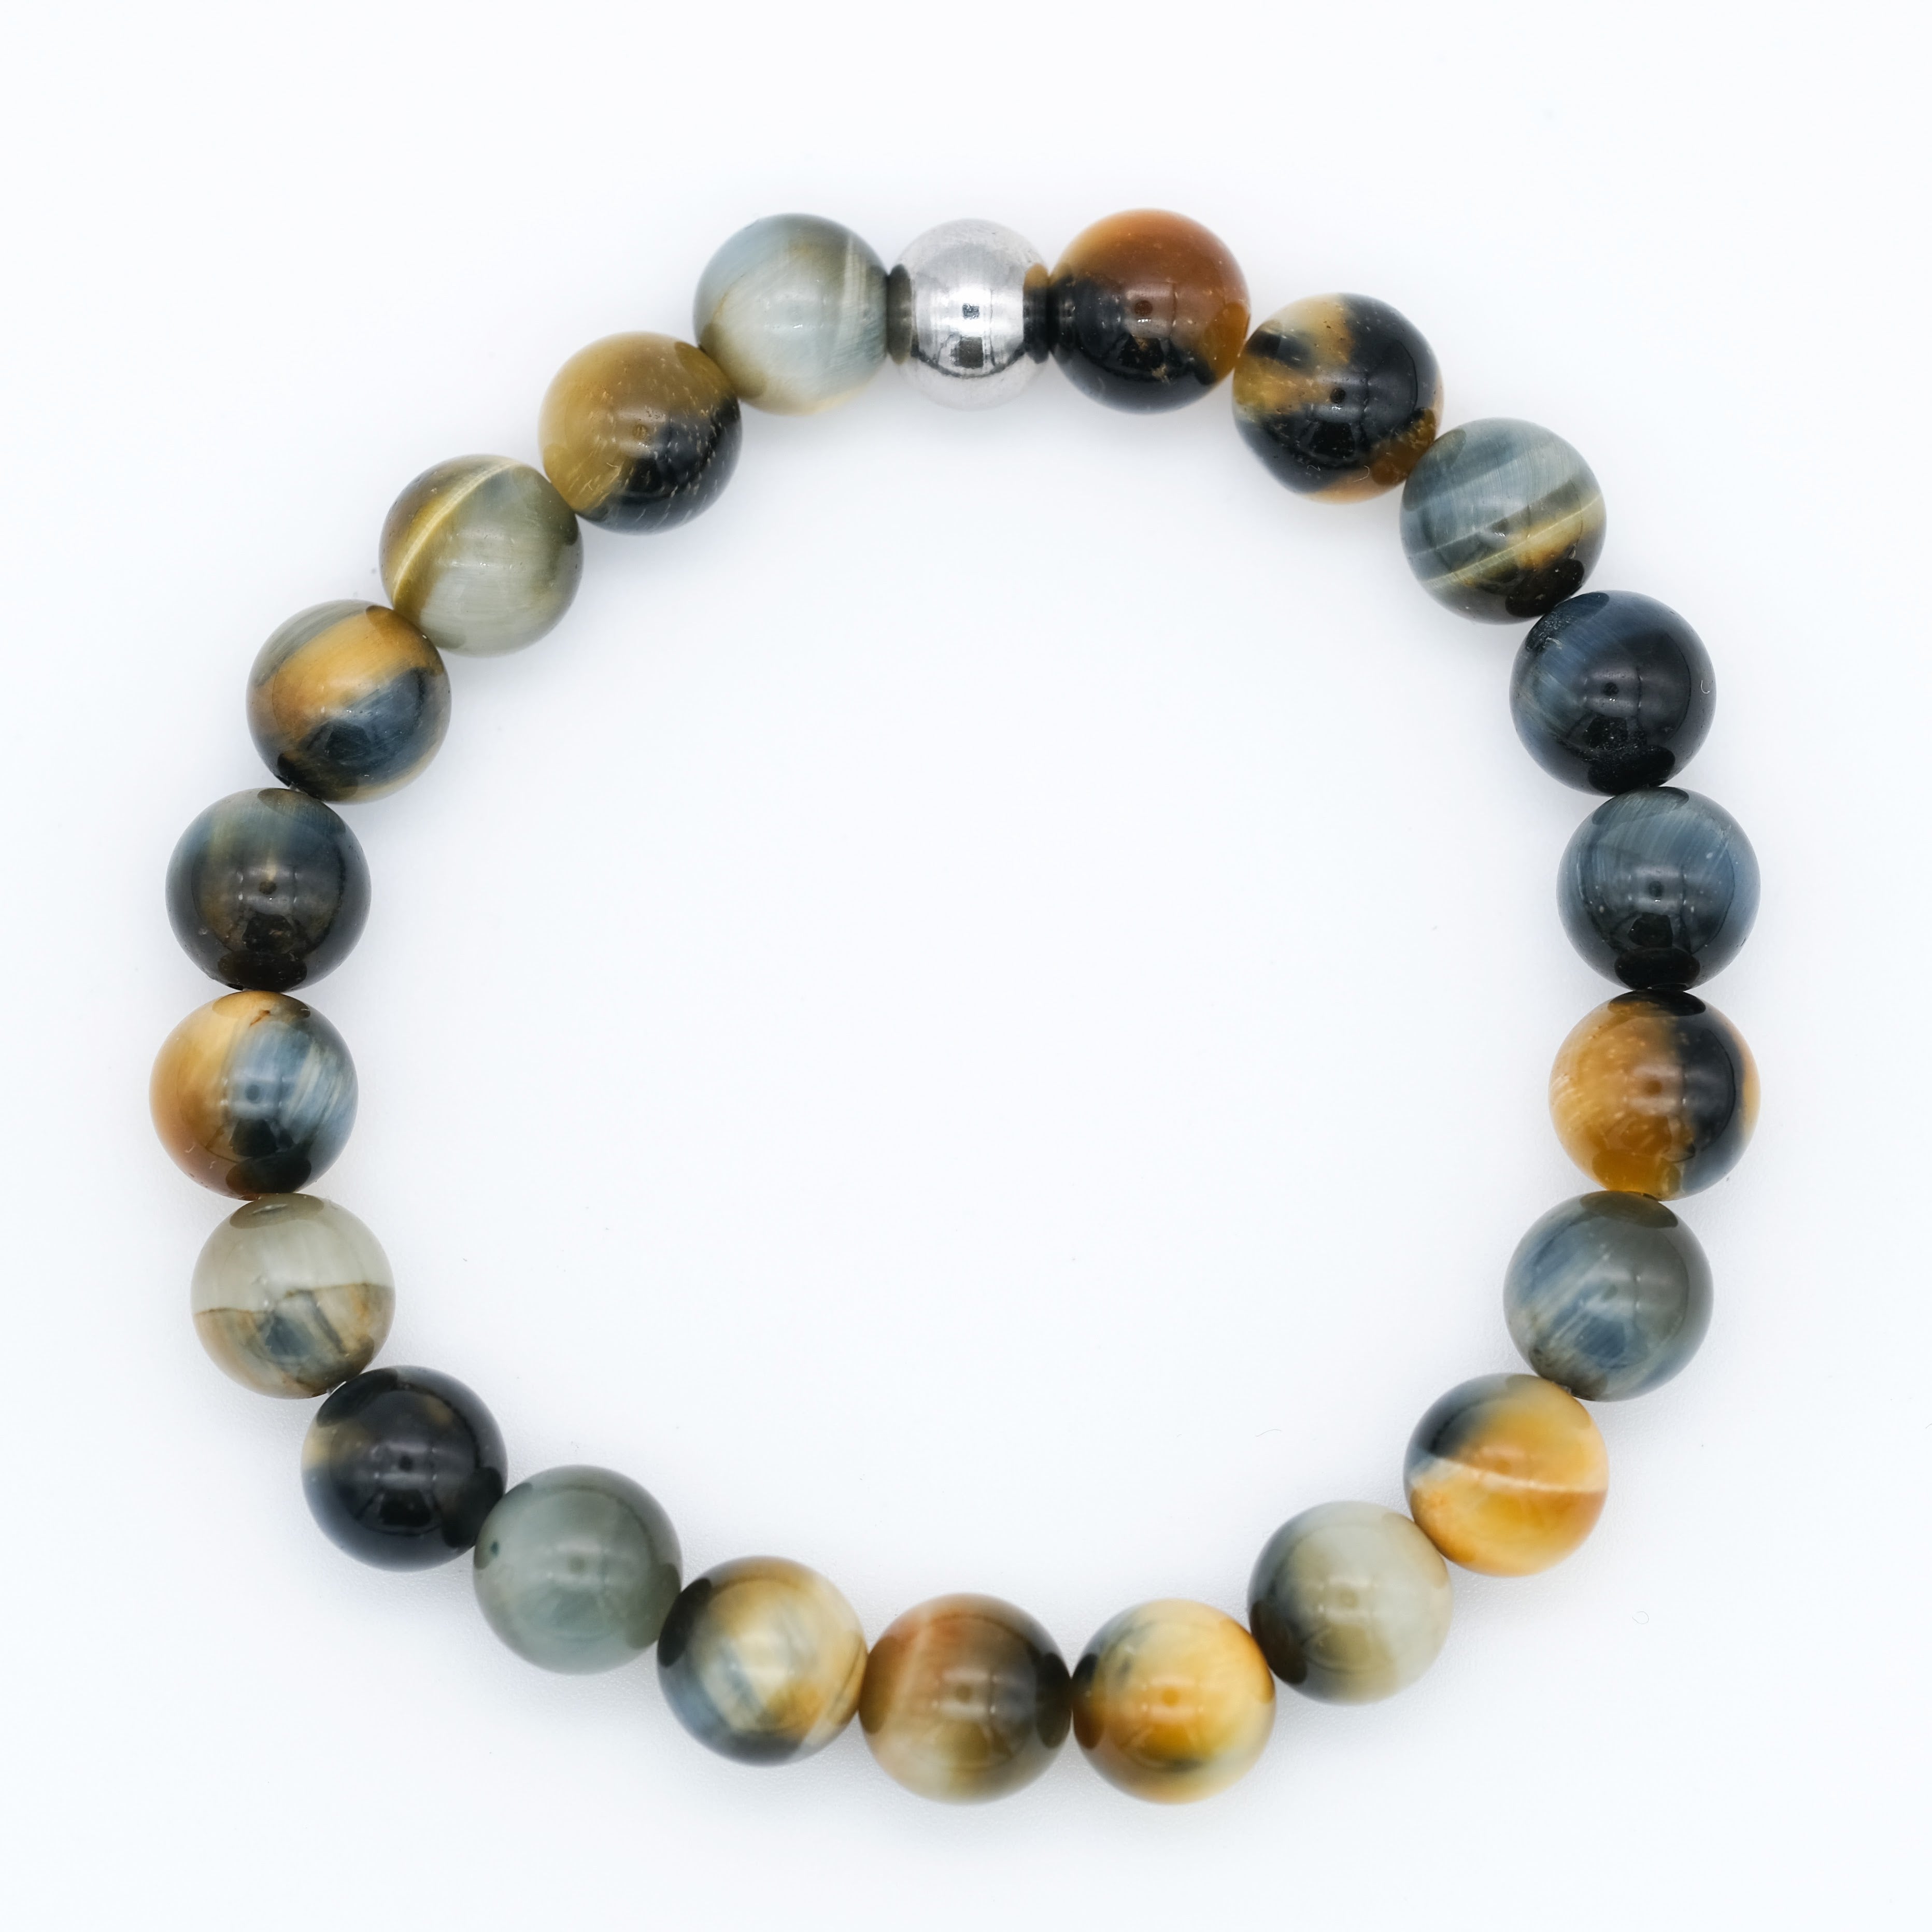 Dream tiger eye gemstone bracelet with silver accessory from above